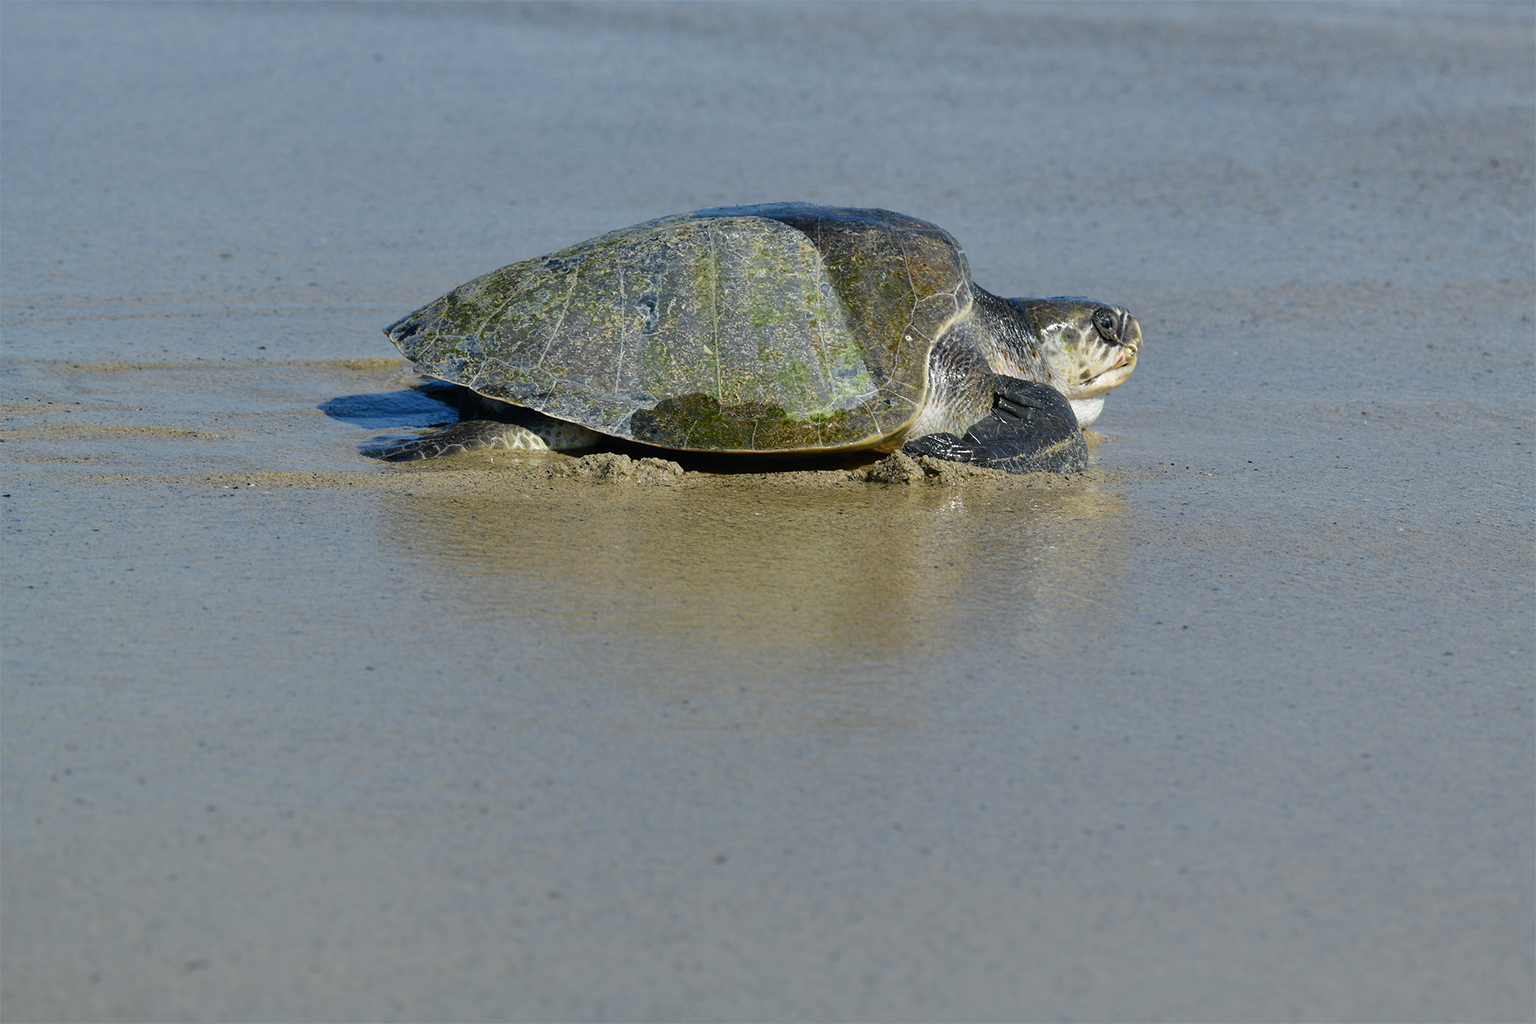 Olive ridley turtle.